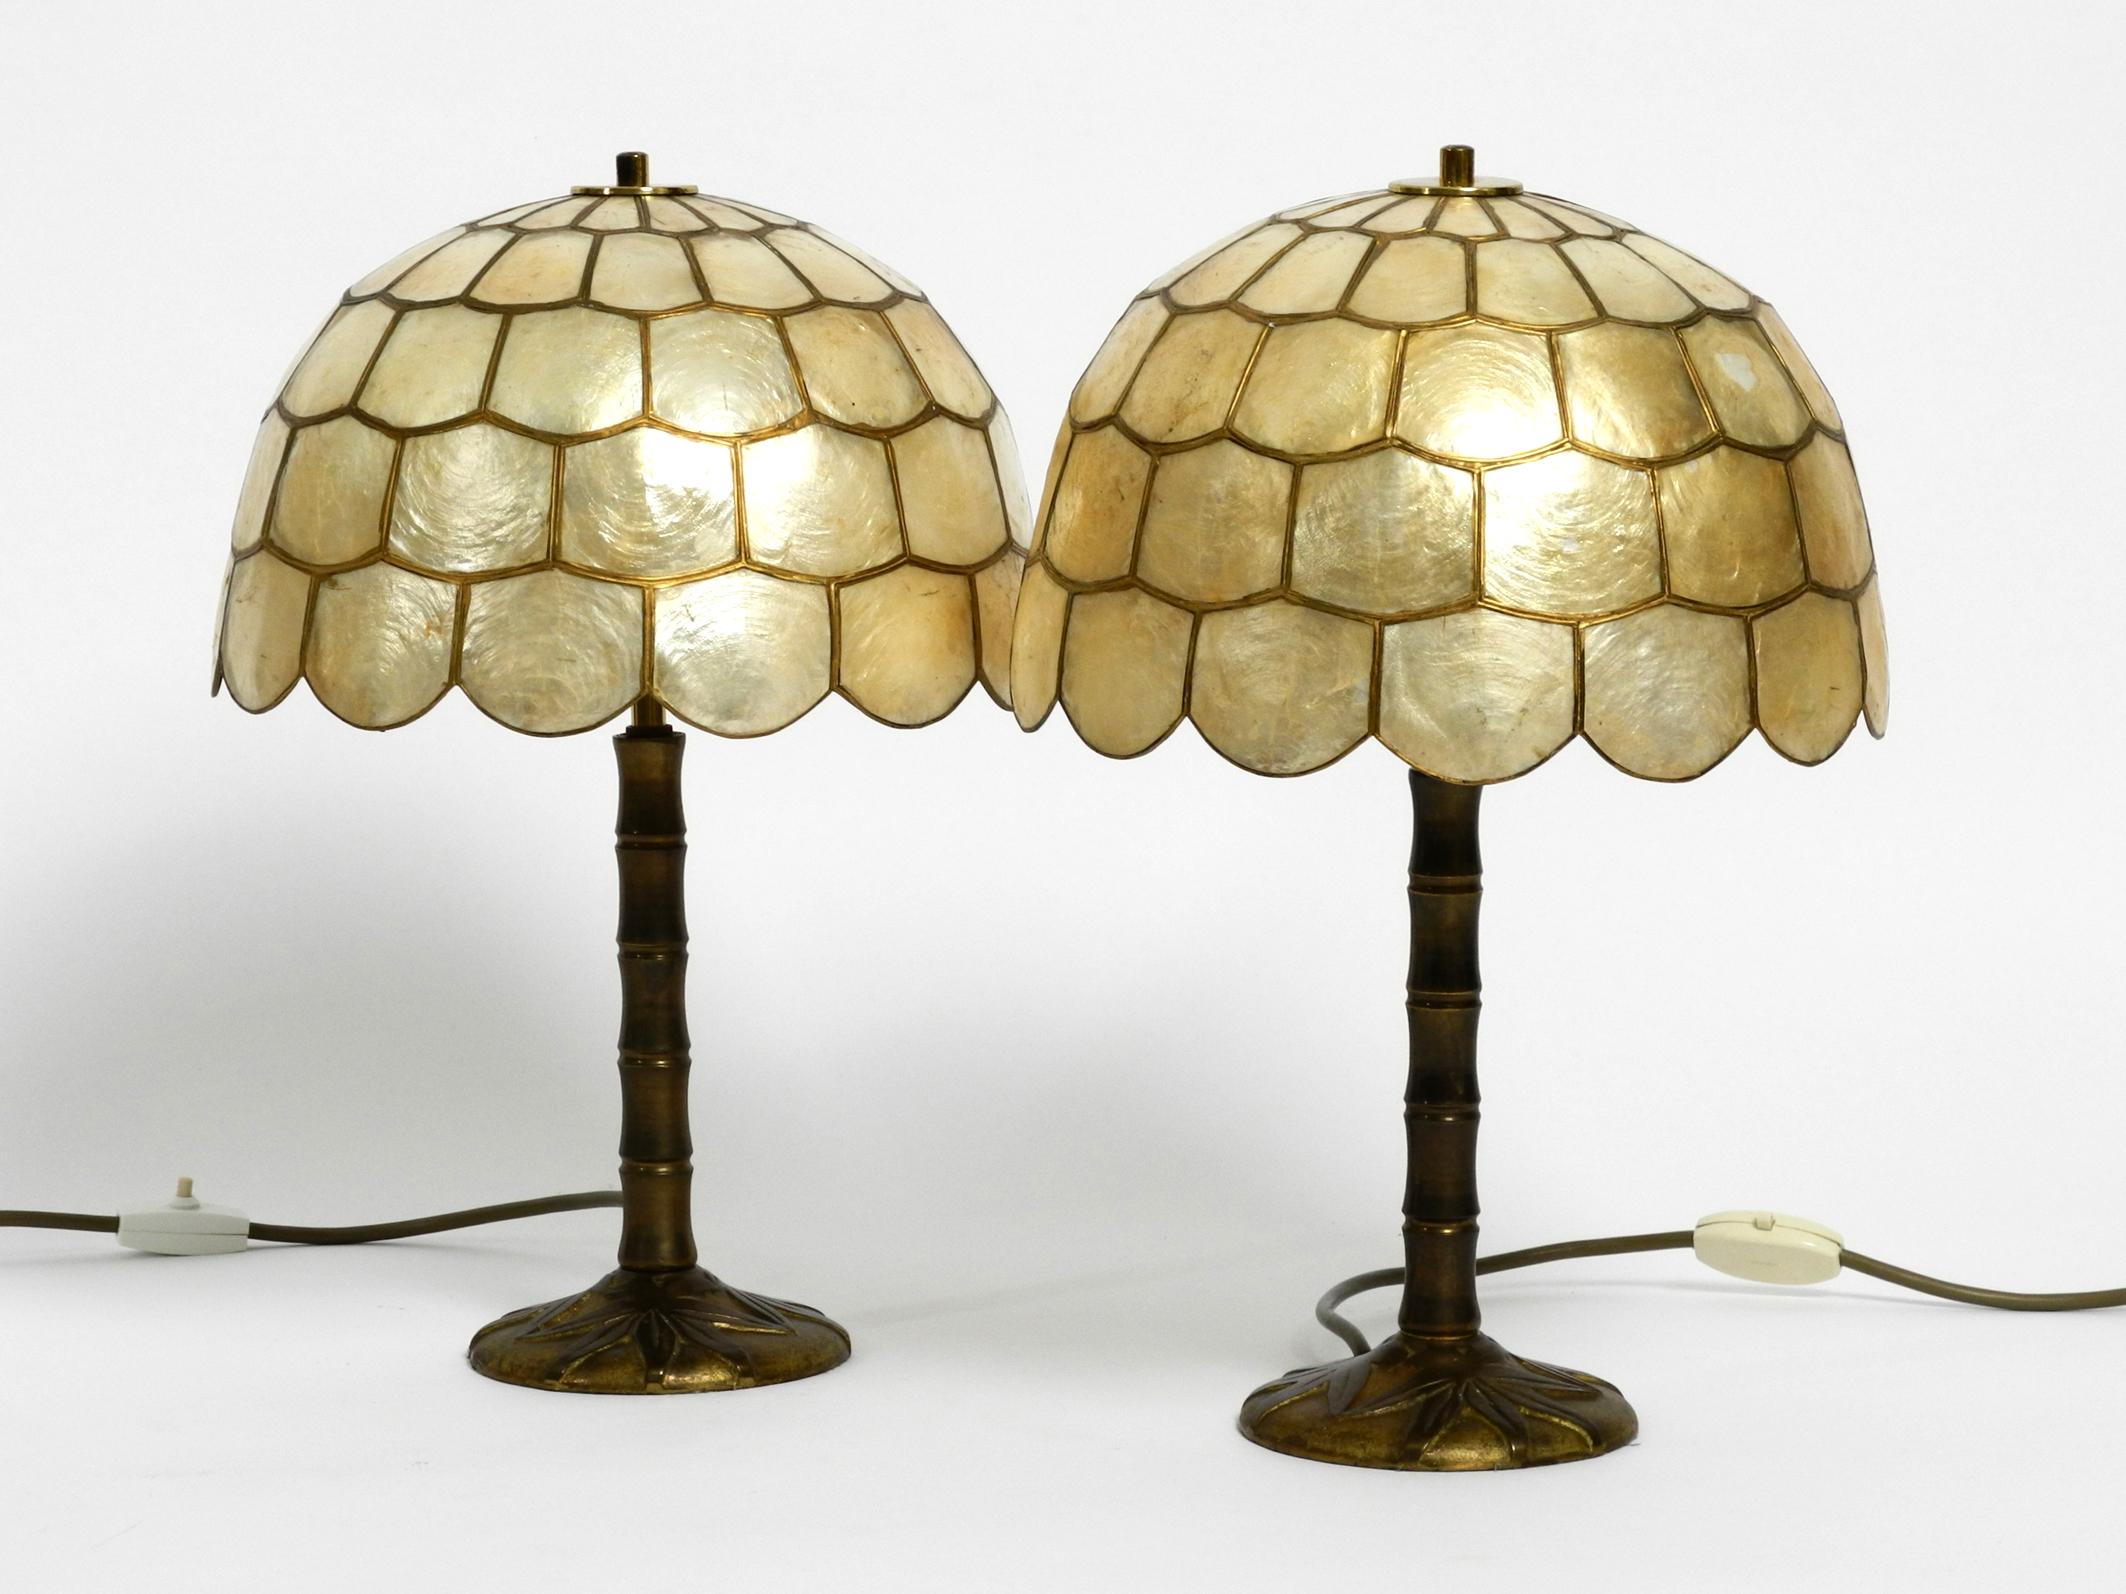 Pair of stunning beautiful large 1960s brass table lamps with mother of pearl shades.
Great rare floral design from the 1960s. Brass frame looks like a bamboo plant.
Very high quality workmanship and few signs of use. 
Both shades are made of